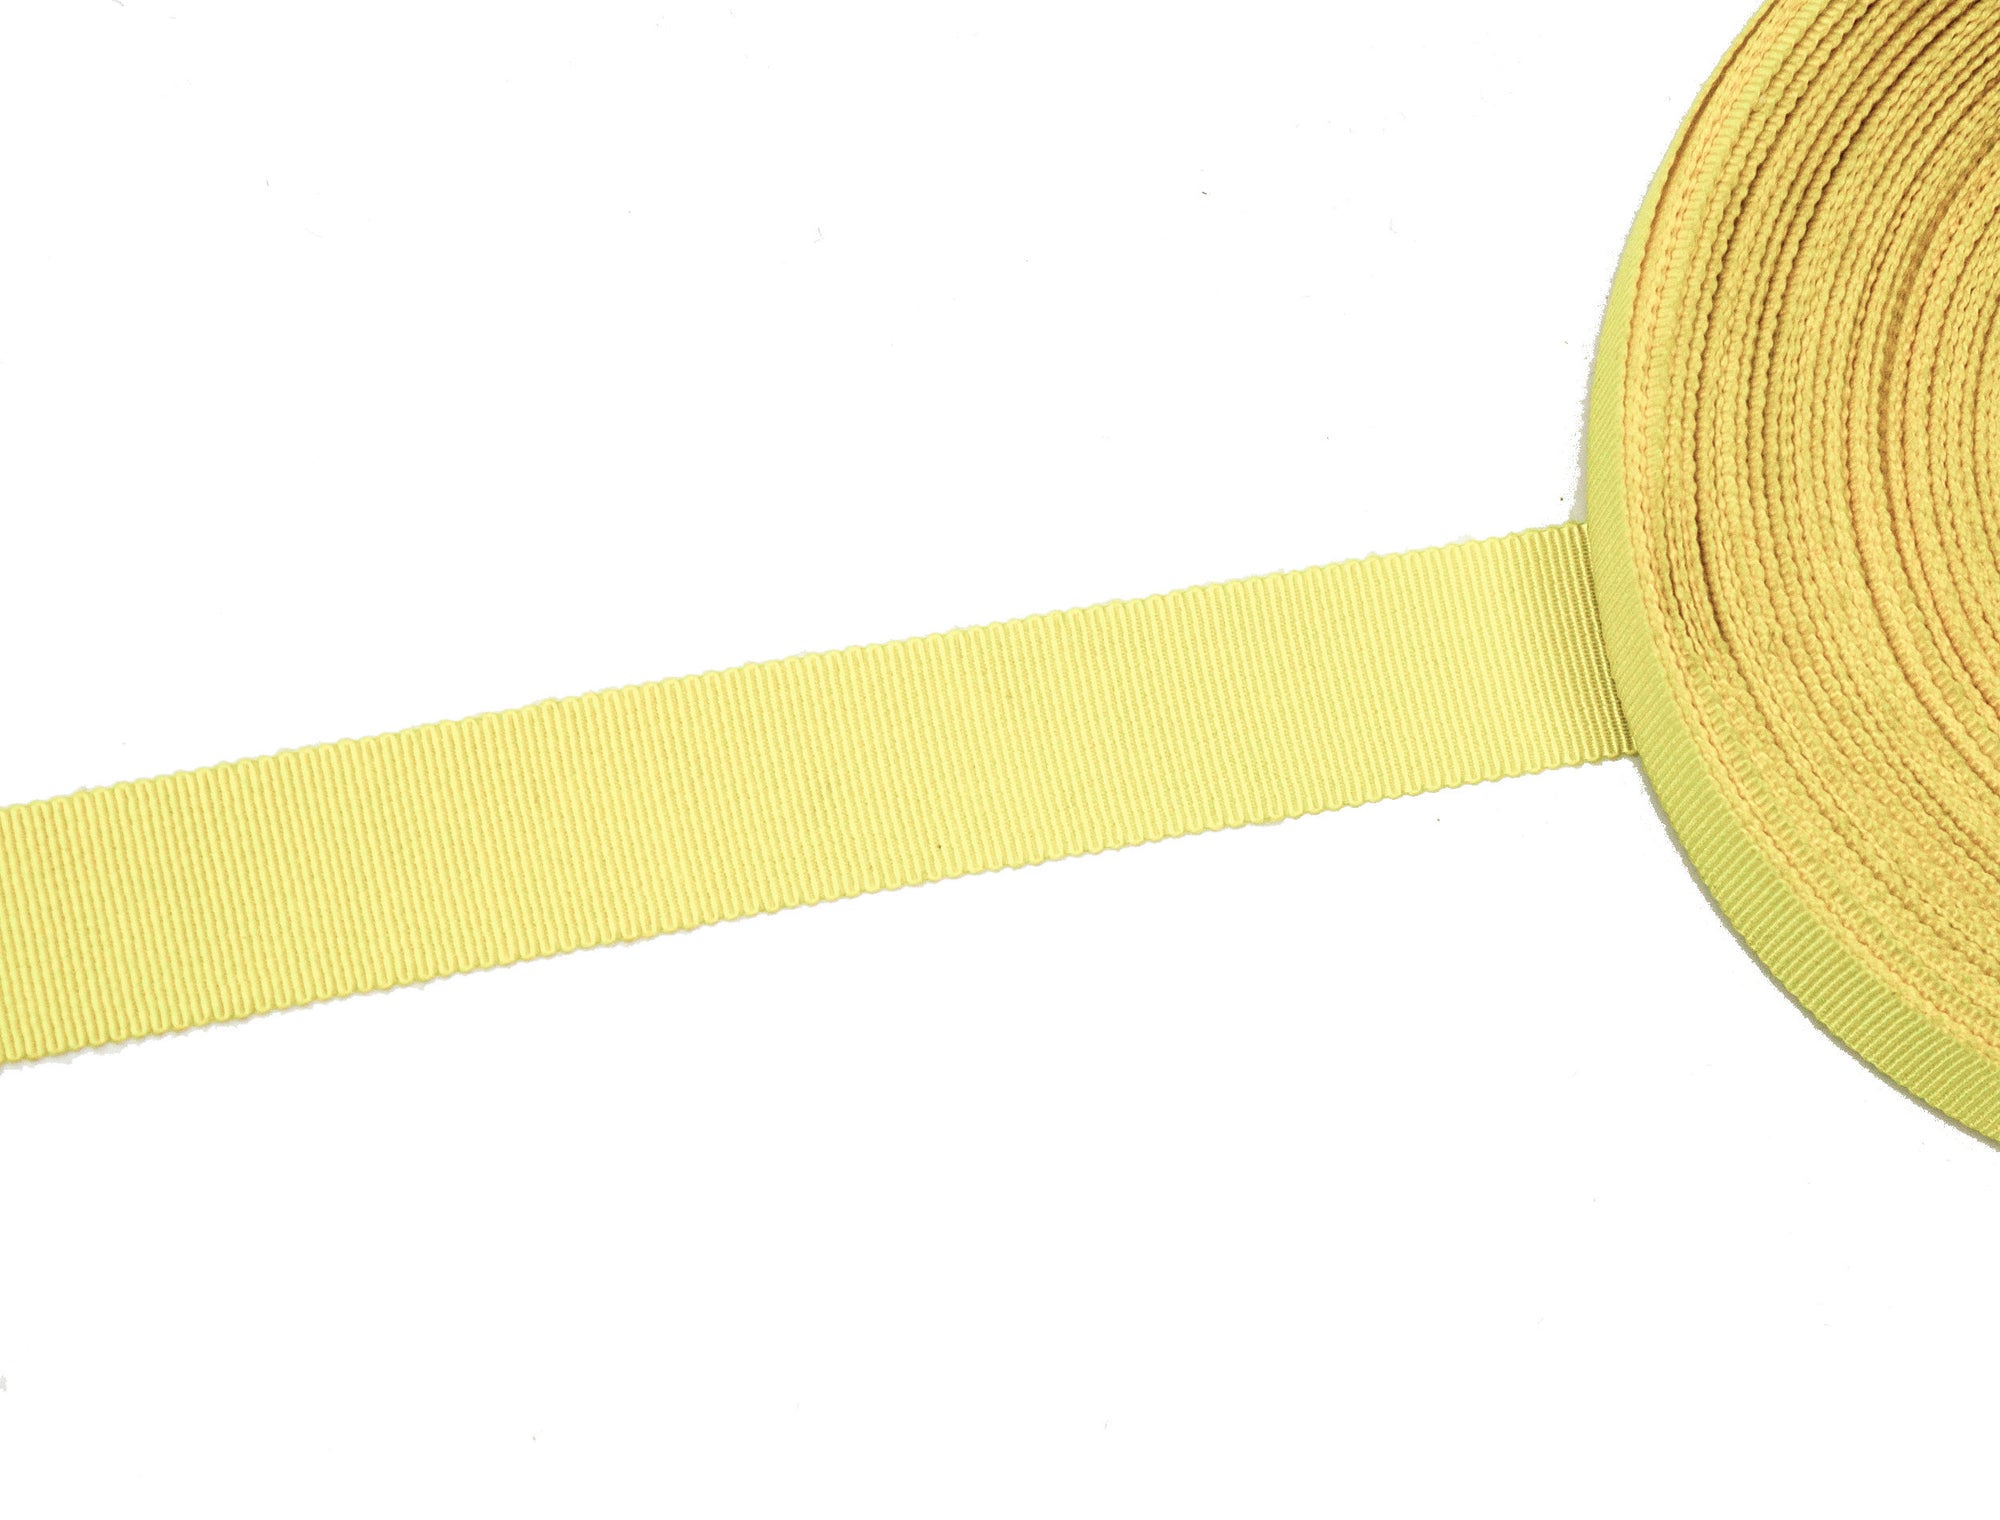 Vintage Petersham Ribbon Light Yellow  Measures 23 mm Wide - Sold by the Yard